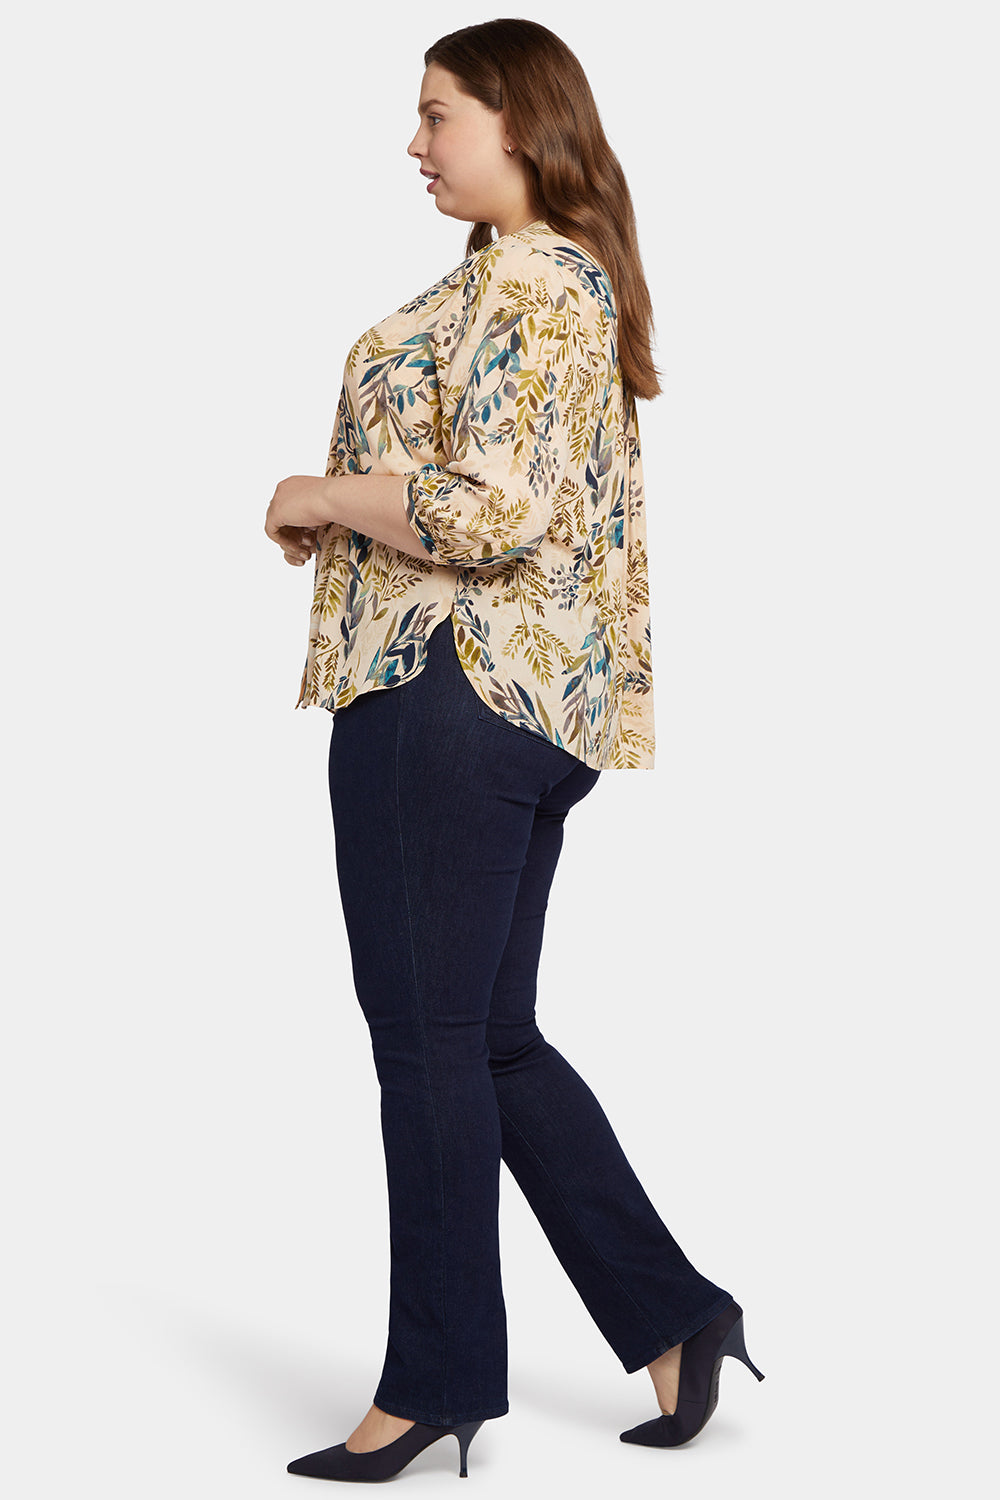 NYDJ Pintuck Blouse In Plus Size  - Elm Hill